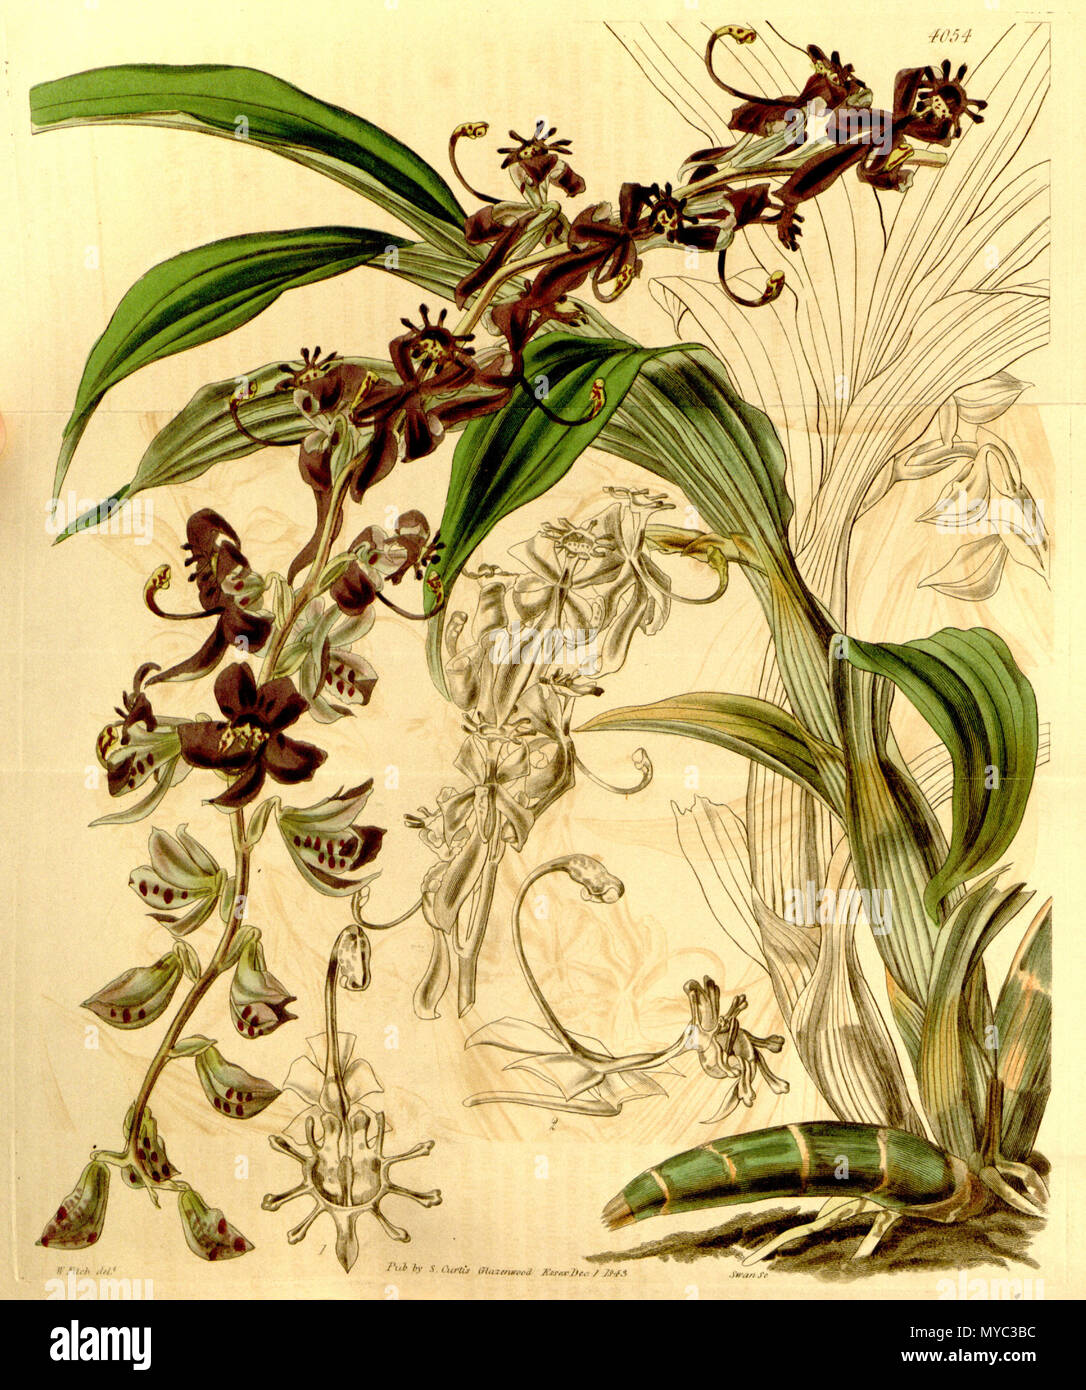 . Illustration of Cycnoches egertonianum (as syn. Cycnoches ventricosum var. egertonianum) . 1844. Walter Hood Fitch (1817-1892) del., Swan sc. 128 Cycnoches egertonianum (as Cycnoches ventricosum var. egertonianum) - Curtis' 70 (N.S. 17) pl. 4054 (1844) Stock Photo